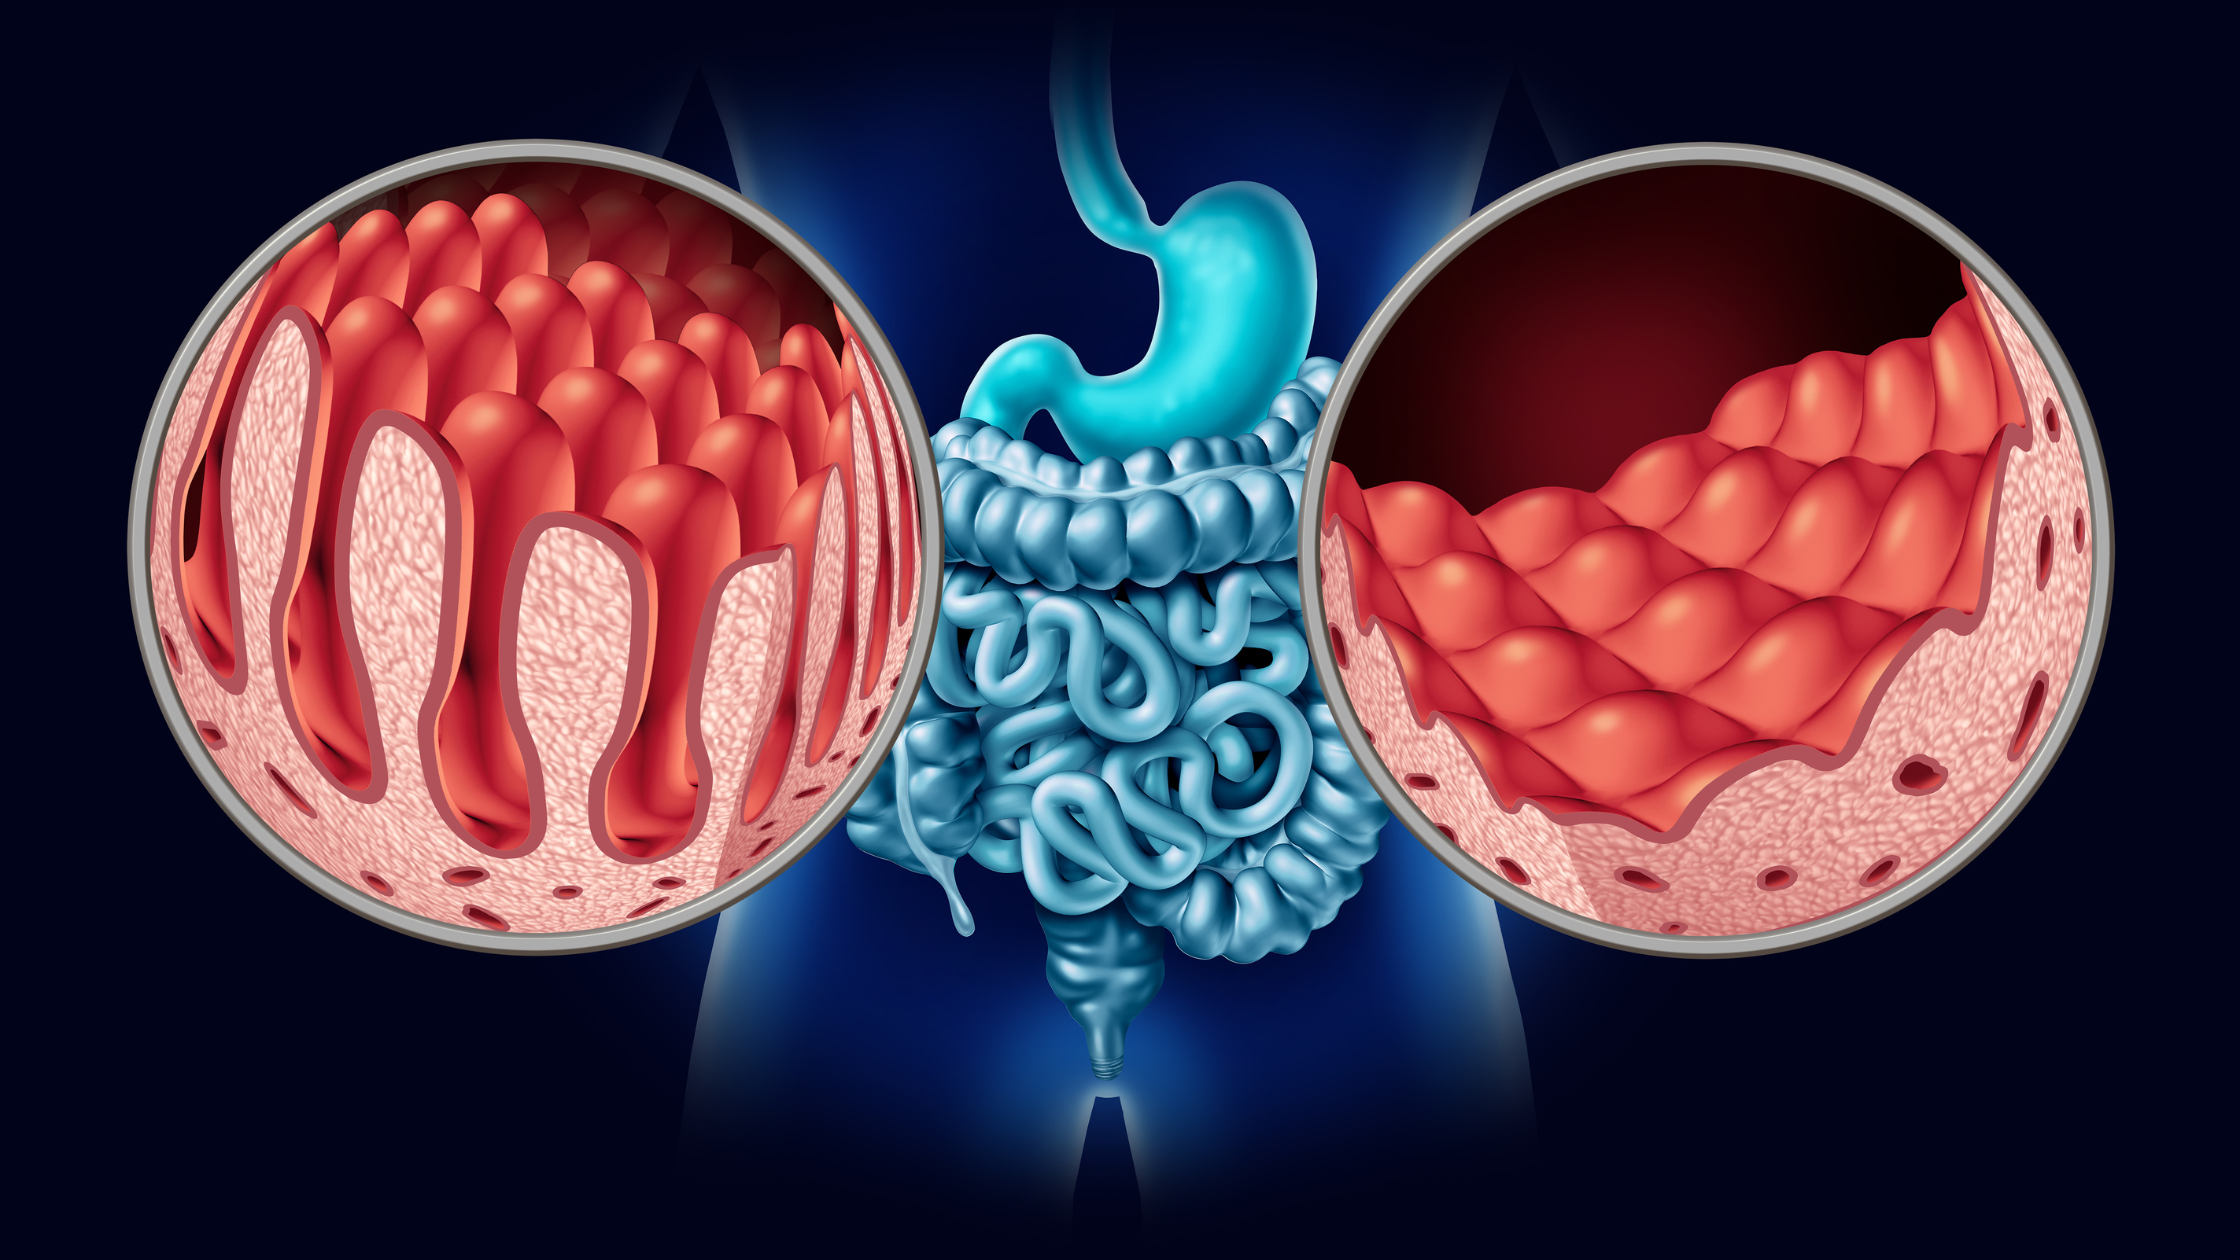 images of both a normal and an inflamed small intestine